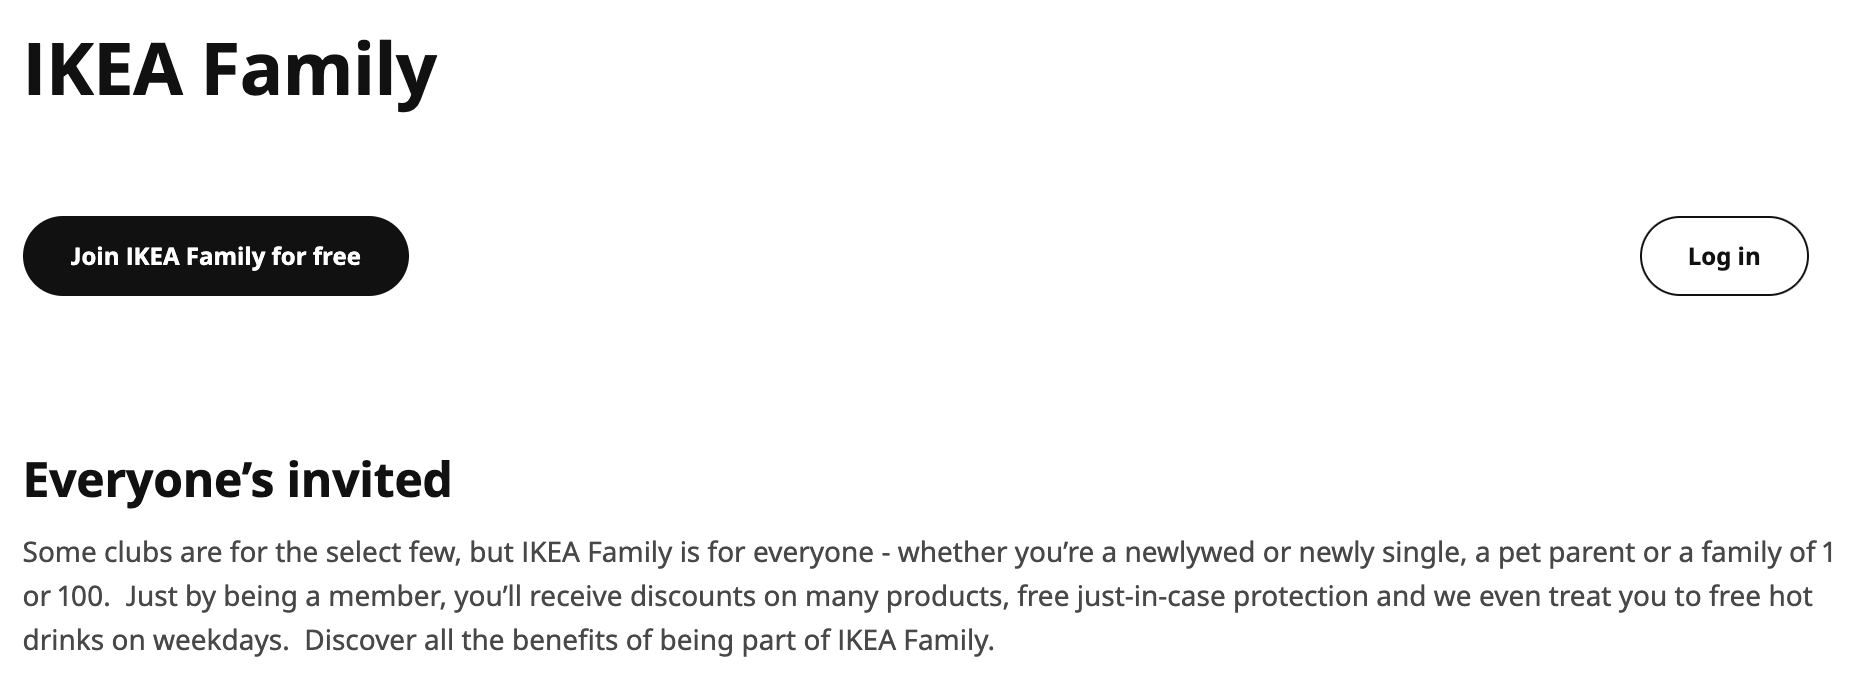 The page of IKEA's website about the IKEA Family with the text: "Everyone's invited: Some clubs are for the select few, but IKEA family is for everyone – whether you're a newlywed or newly single, a pet parent or a family of 1 or 100. Just by being a member, you'll receive discounts on many products, free just-in-case protextion and we even treat you to free hot drinks on weekdays. Discover all the benefits of being part of IKEA Family."